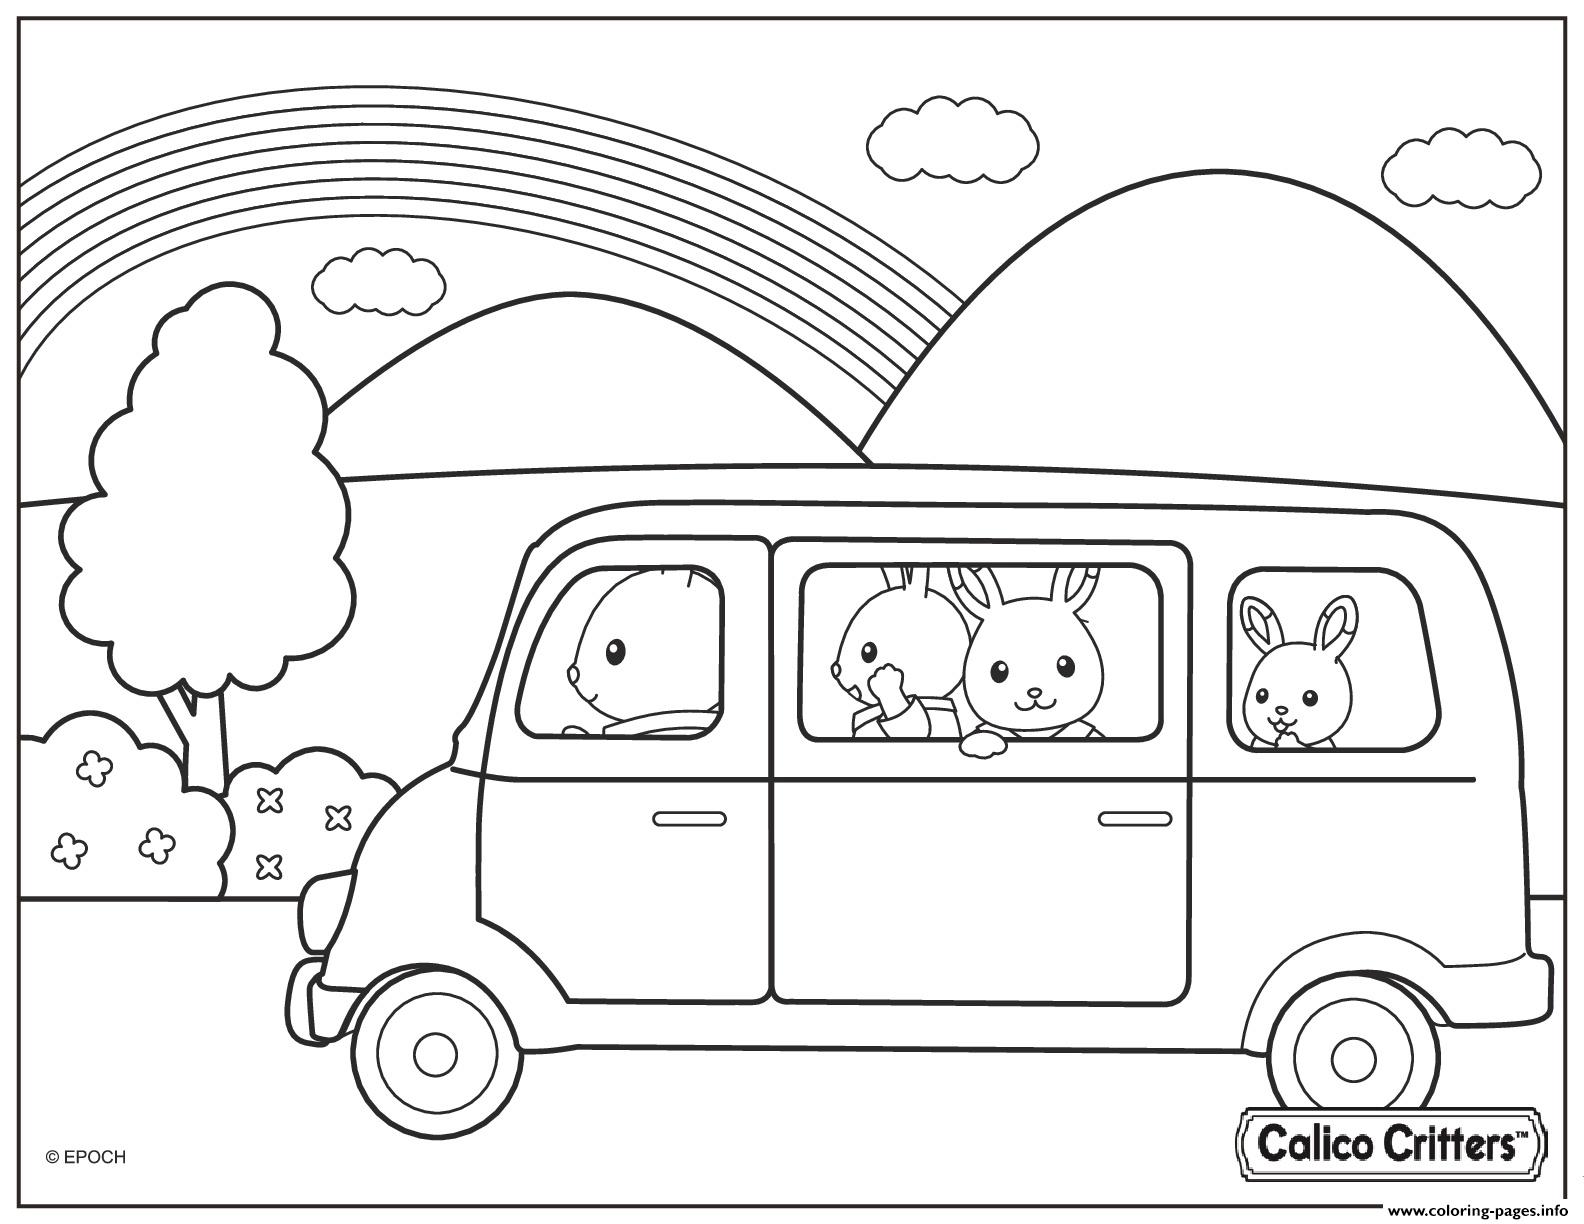 Calico Critters In The Car For Trip coloring